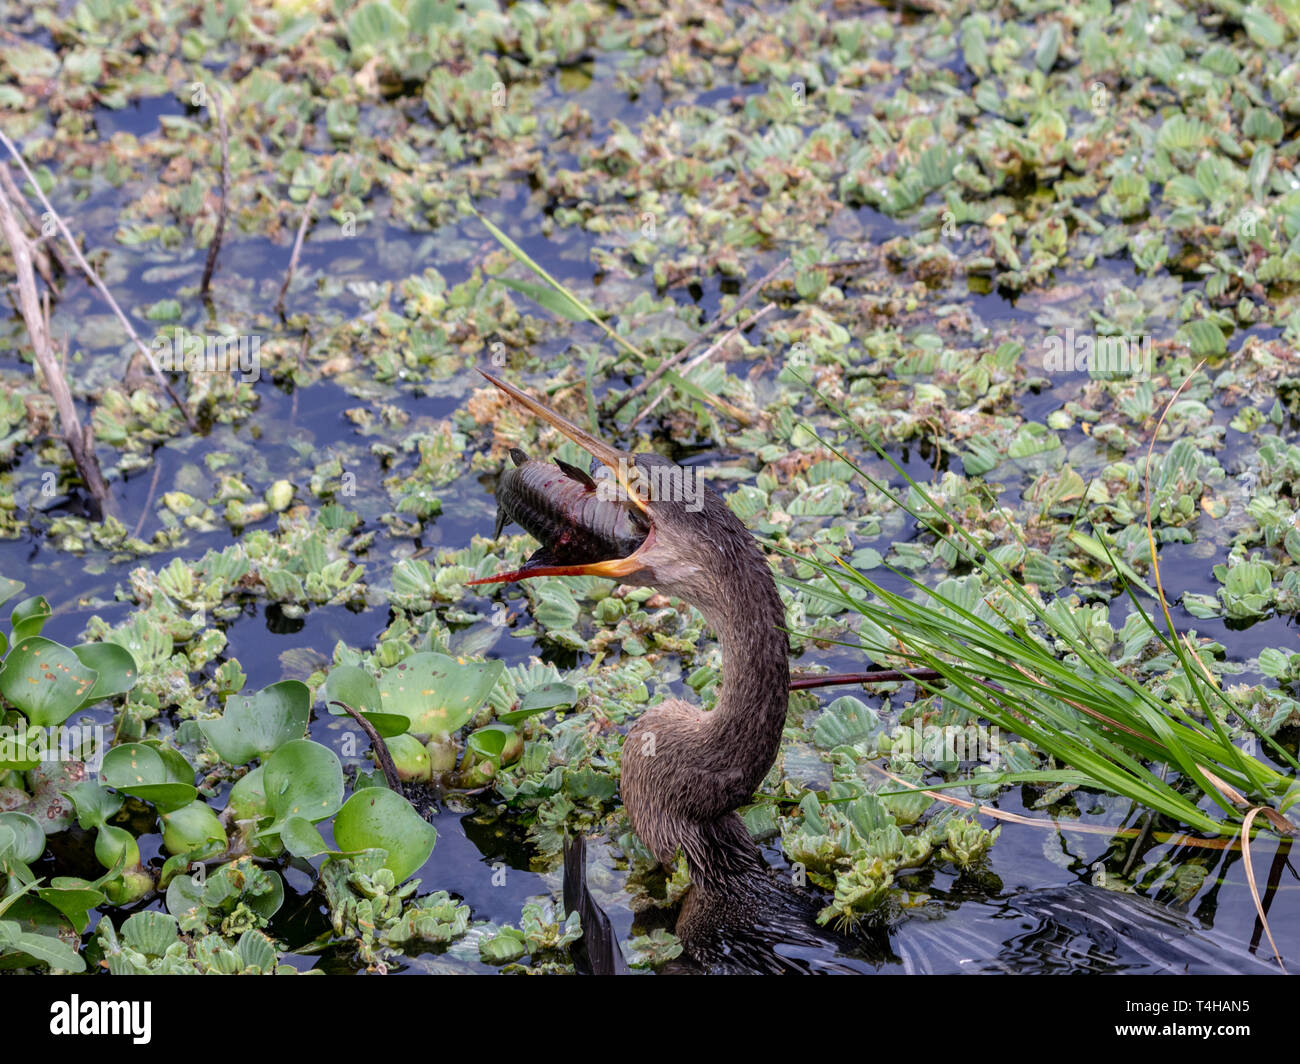 The American darter (Anhinga) swallowing a catfish whole Stock Photo